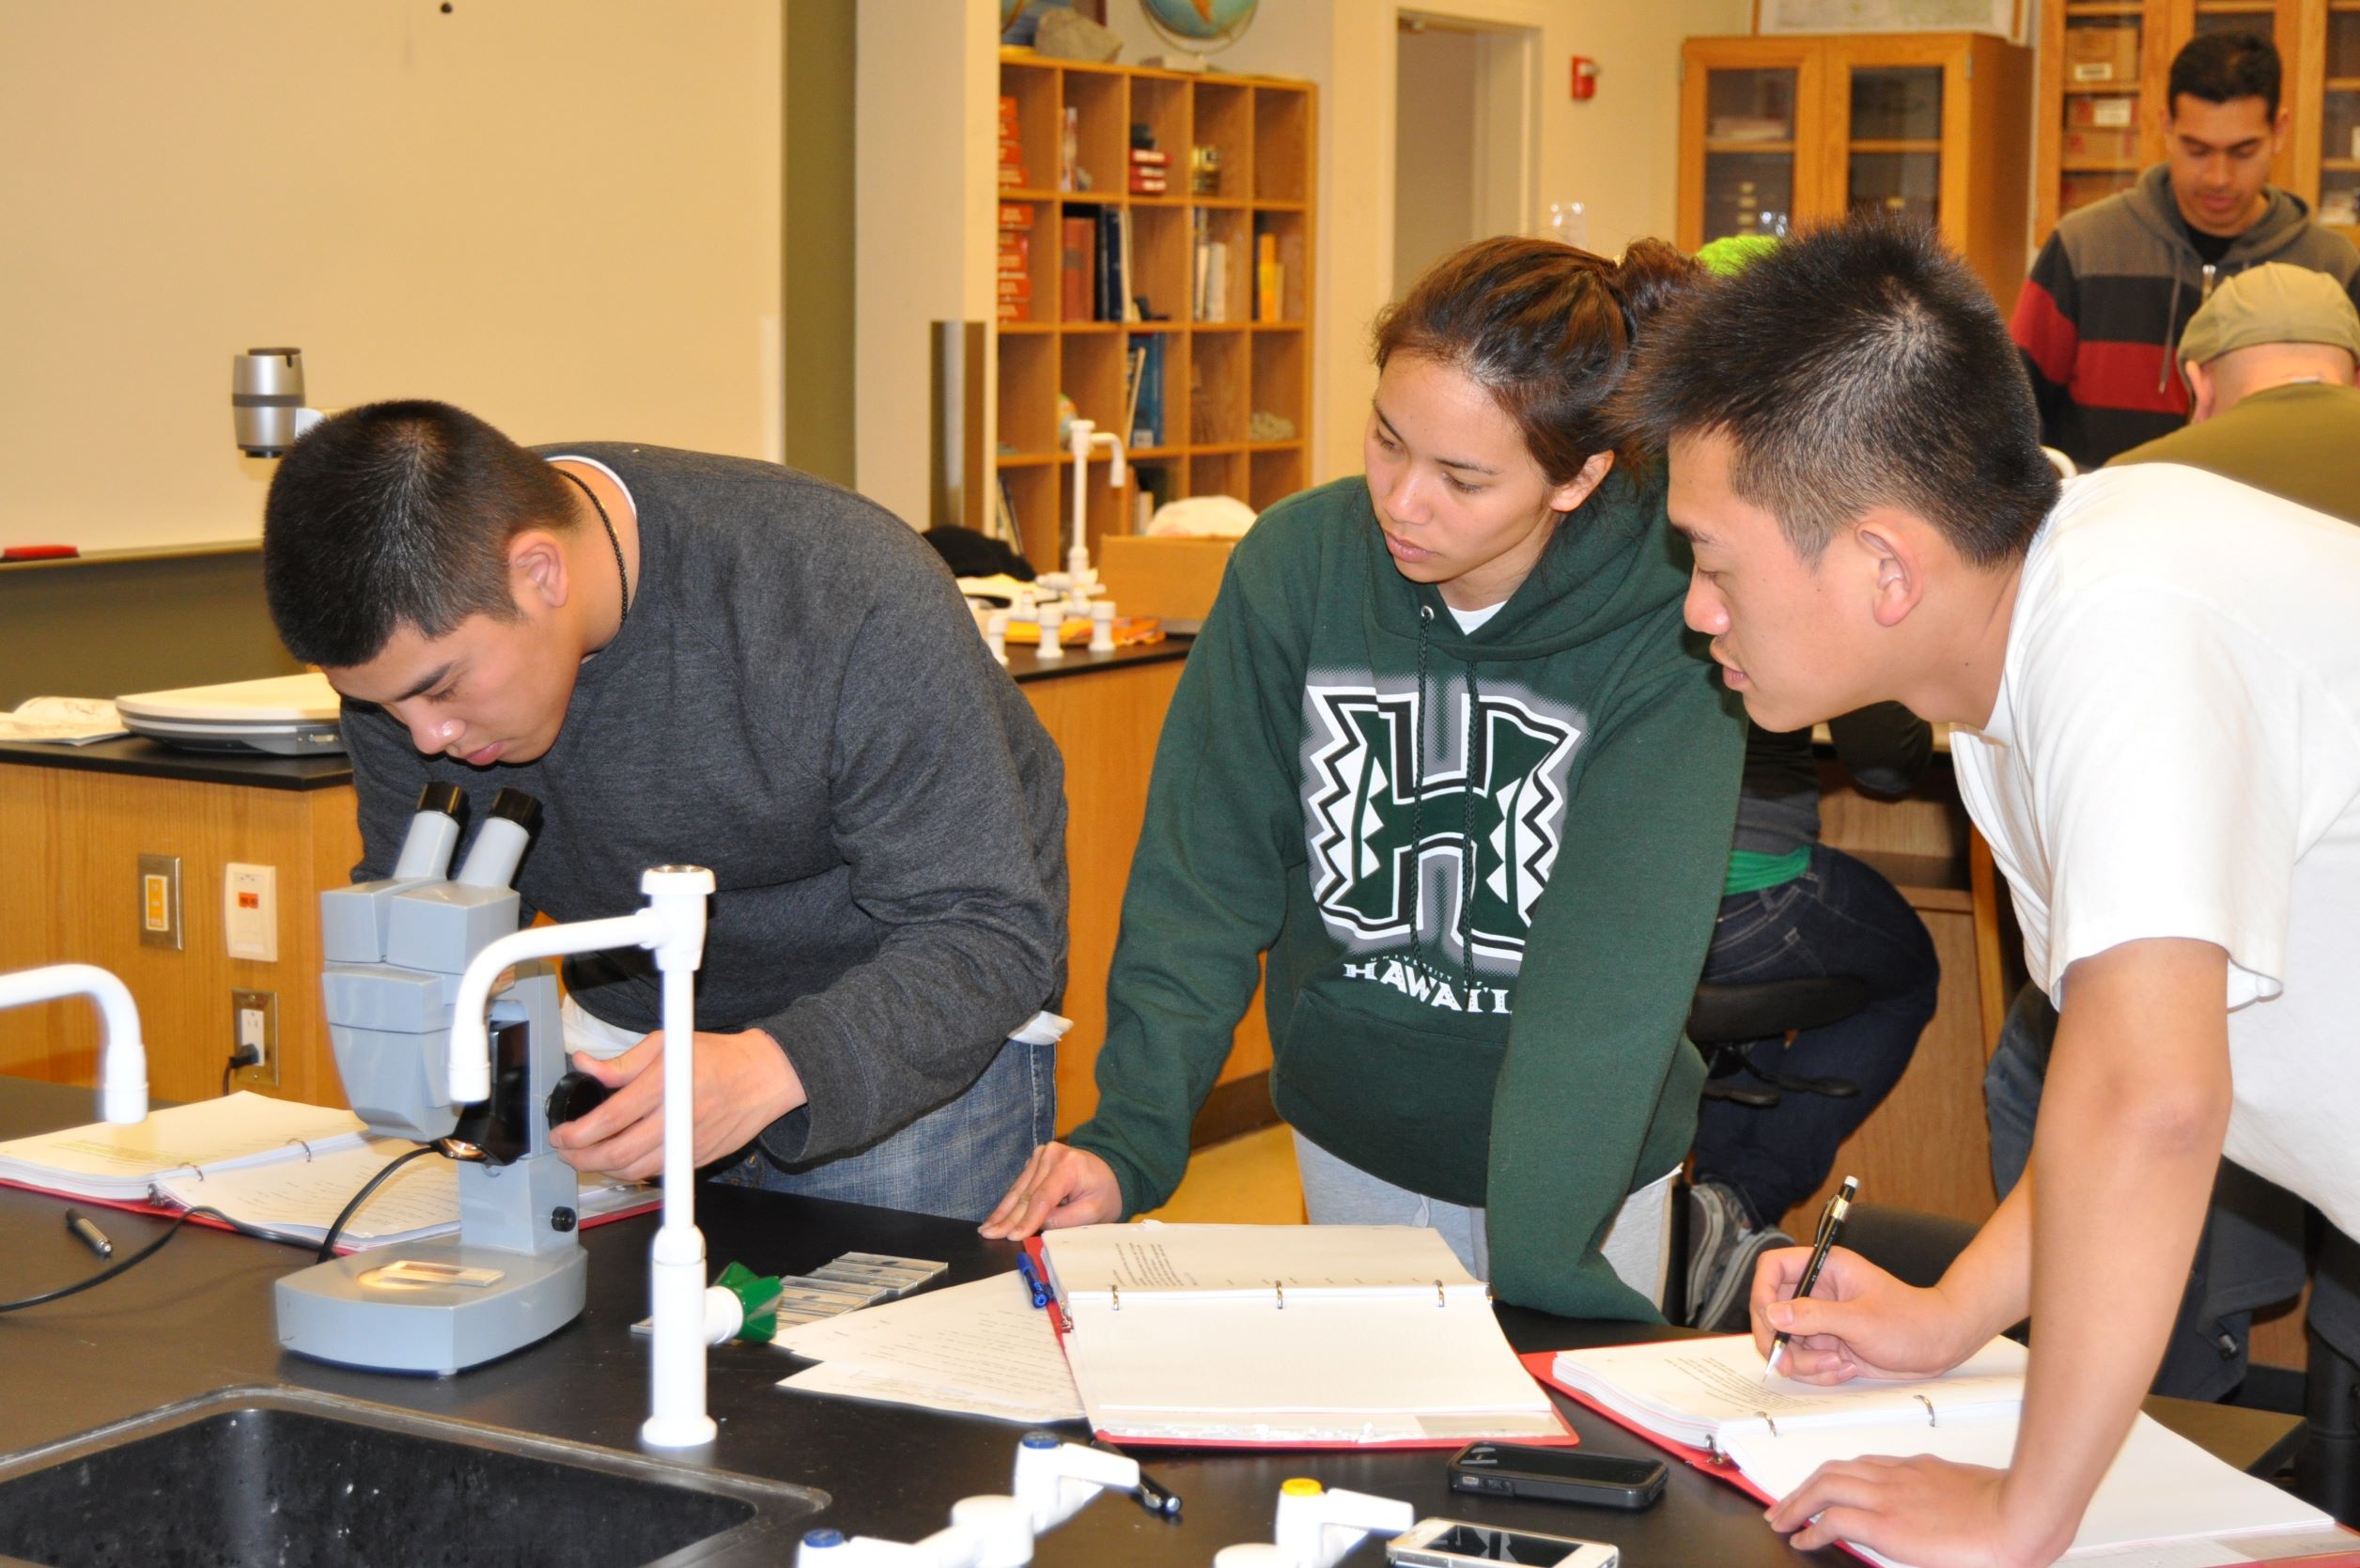 group of three students doing an experiment, one student looking through a microscope while the others take notes.